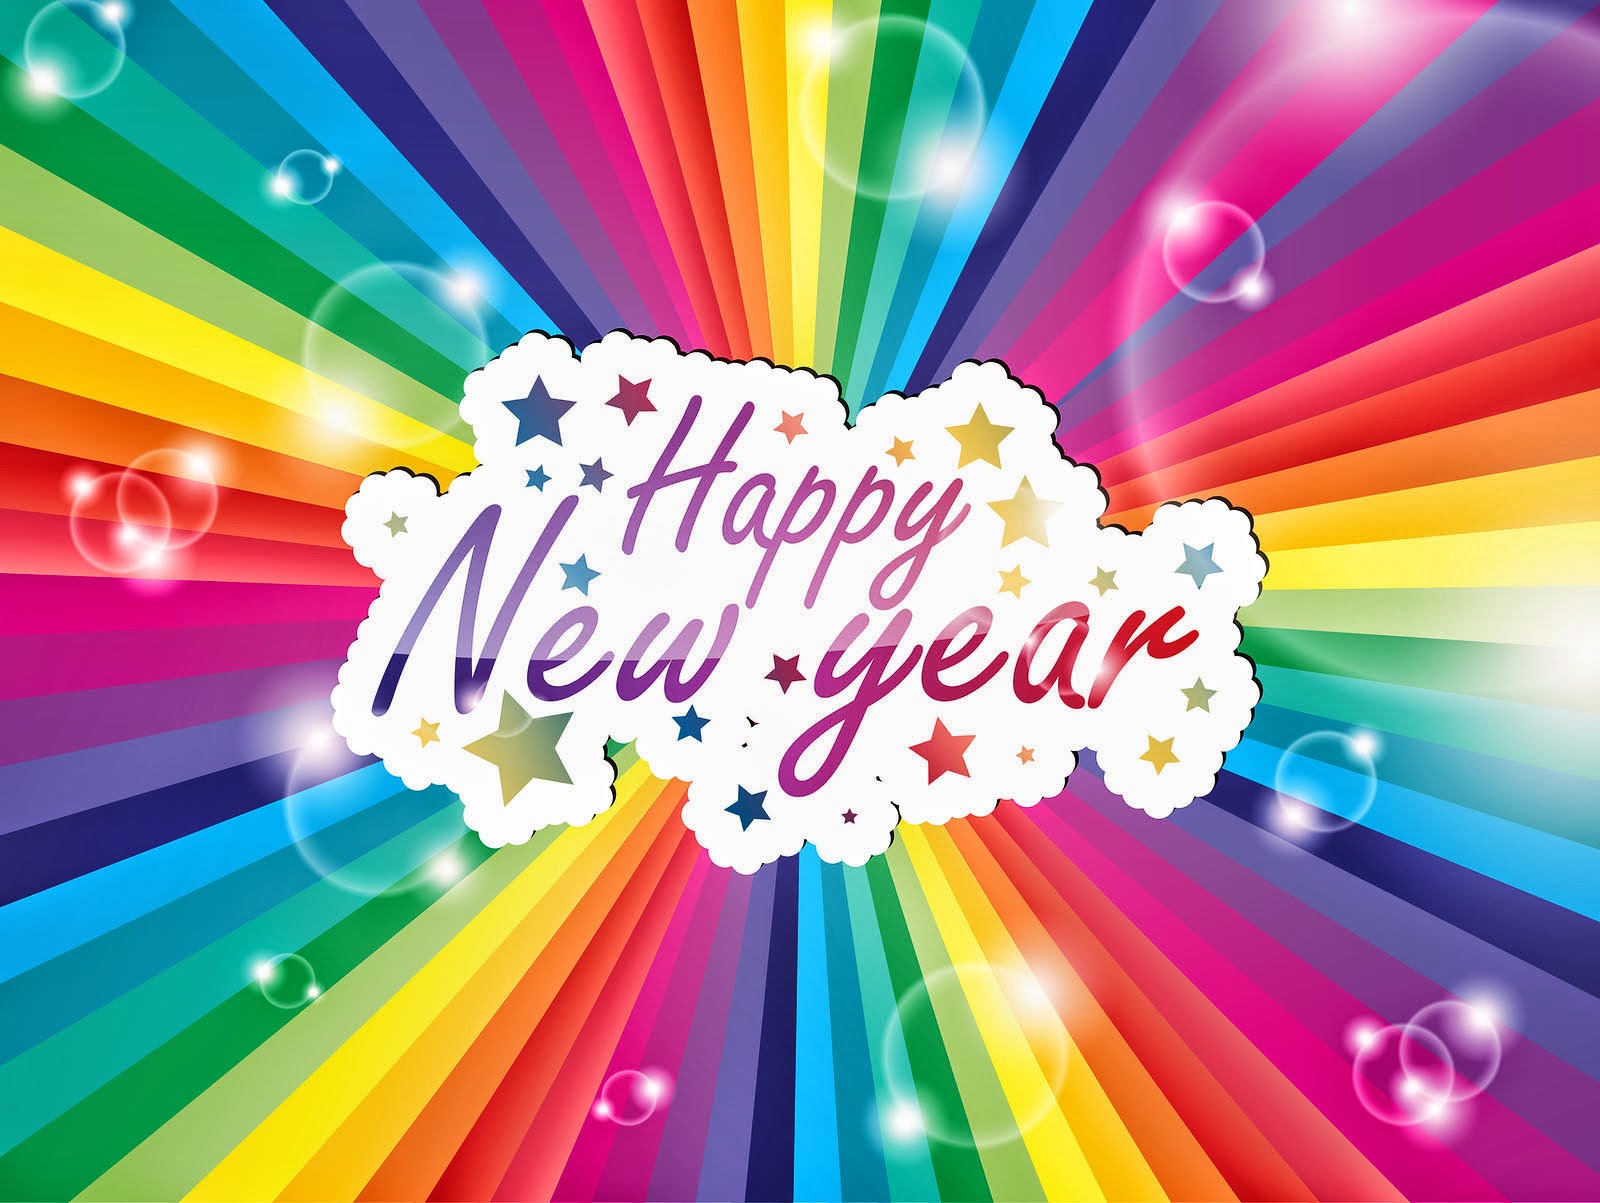 Top 20 Beautiful New Year Wallpapers for your Desktop | Effective